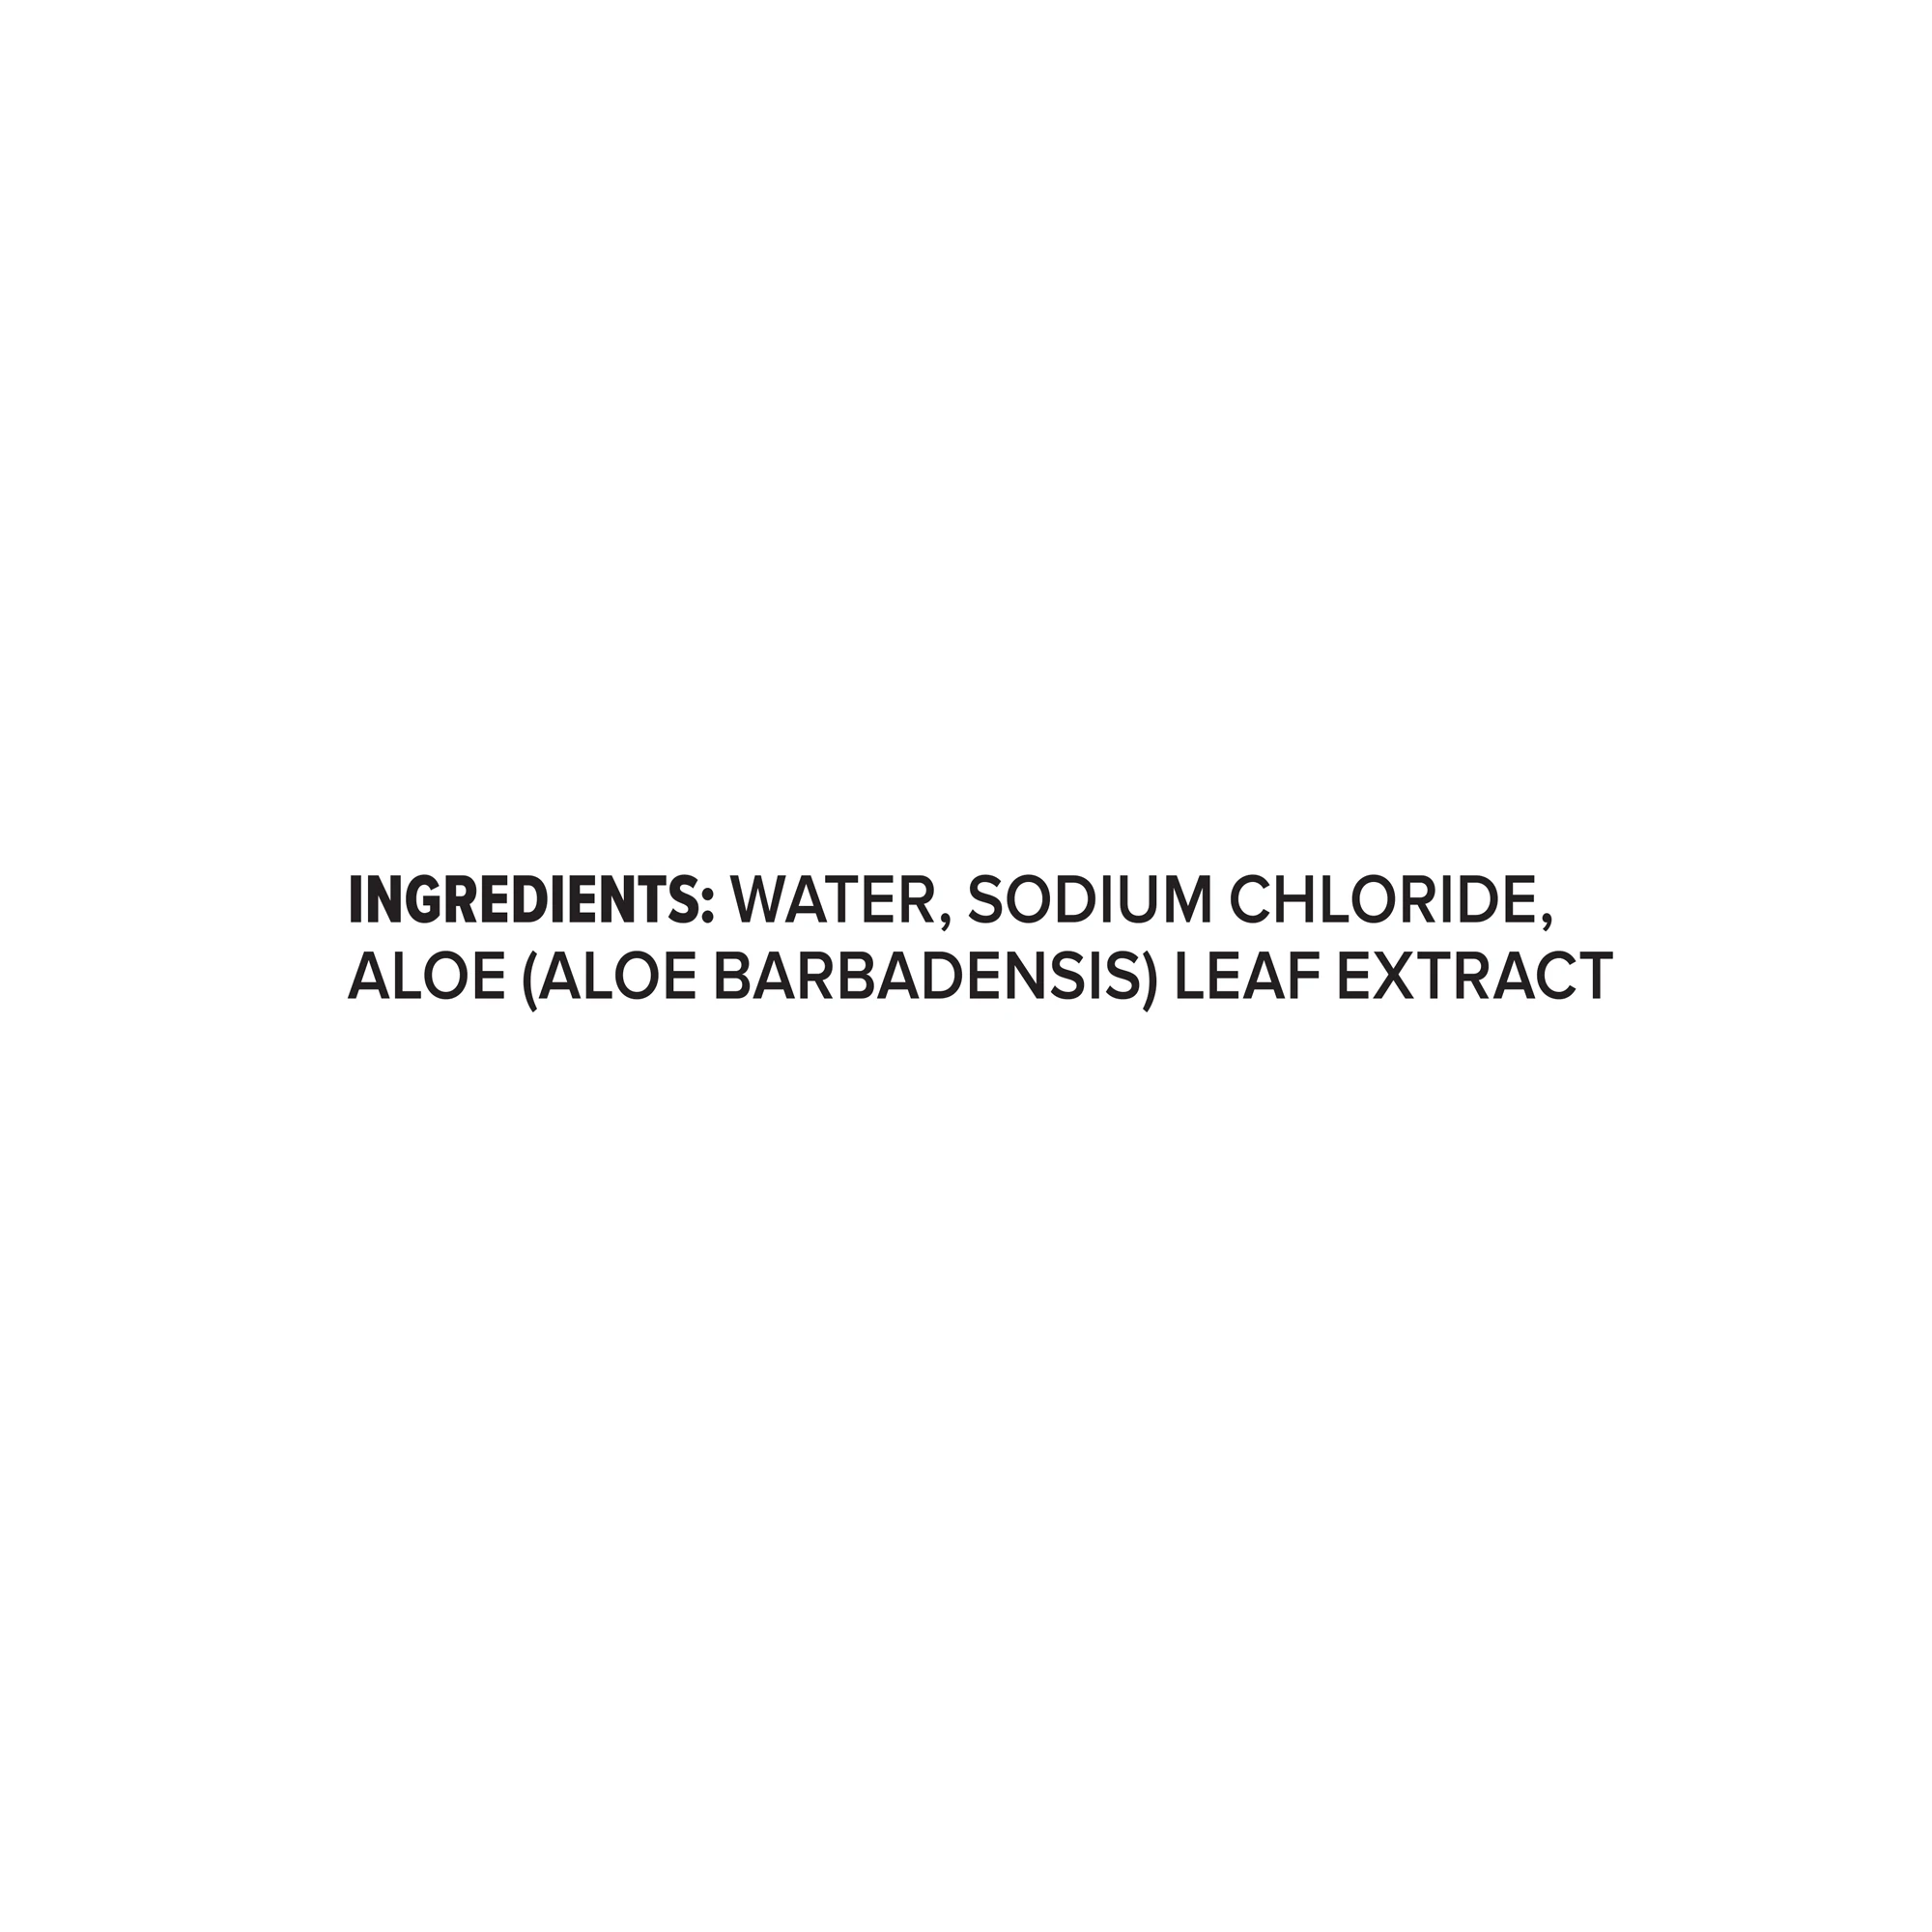 Ingredients label that reads as follows: Water, Sodium Chloride, Aloe (Aloe Barbadensis) leaf extract